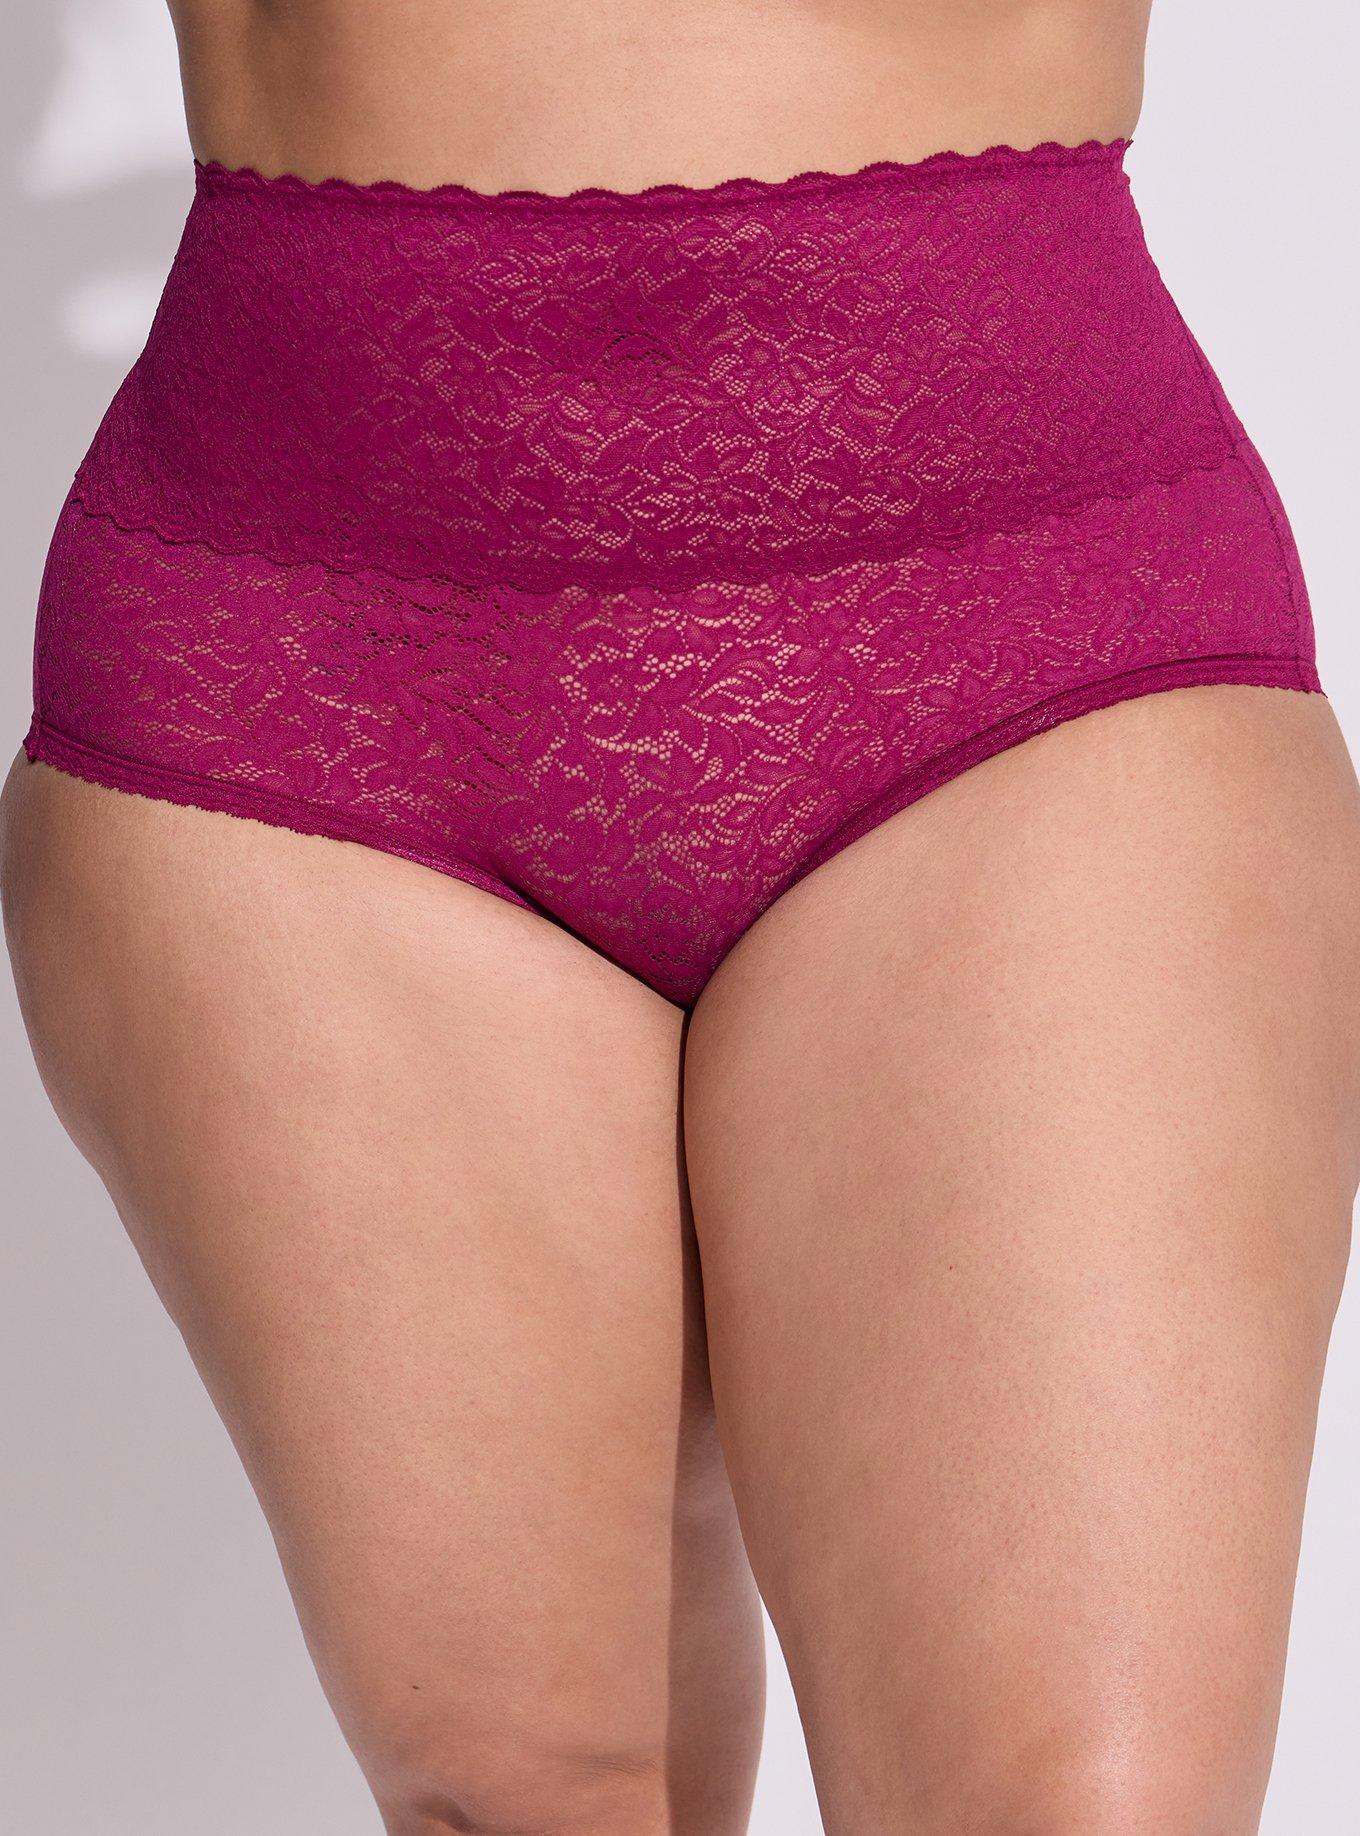 4-Way Stretch Lace High-Rise Brief Panty